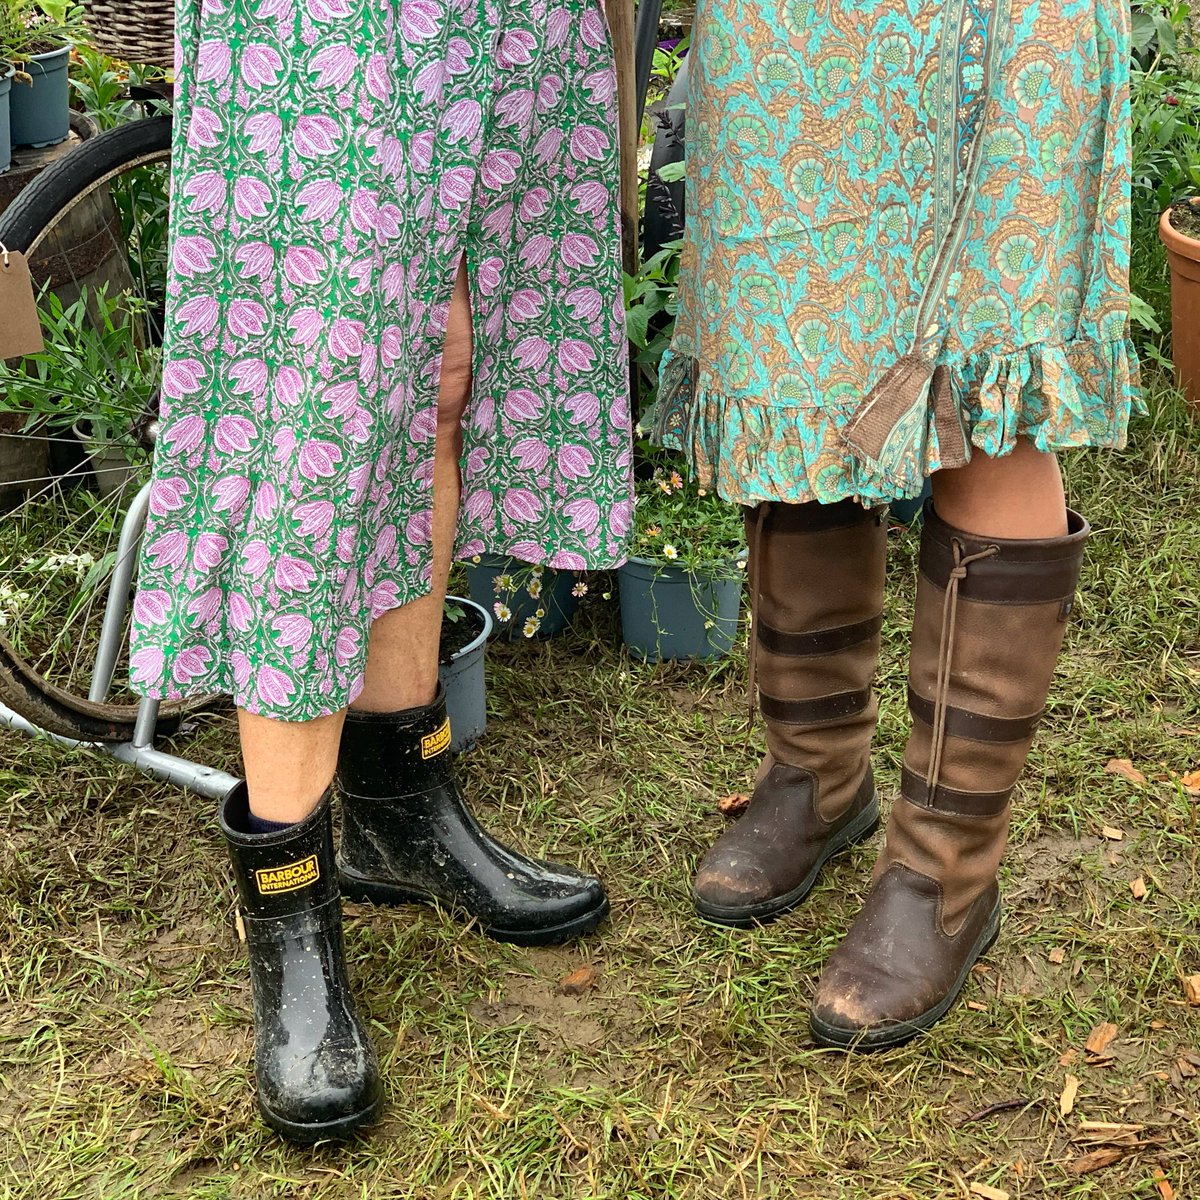 It's all about the #glastochic here today at the #midsummerfair. Another fabulous day of #shopping is underway. Please be aware parking is on a field and sturdy footwear is advised! You can still wear your best frock. Find these at the show from Odyl and Marie & Lola